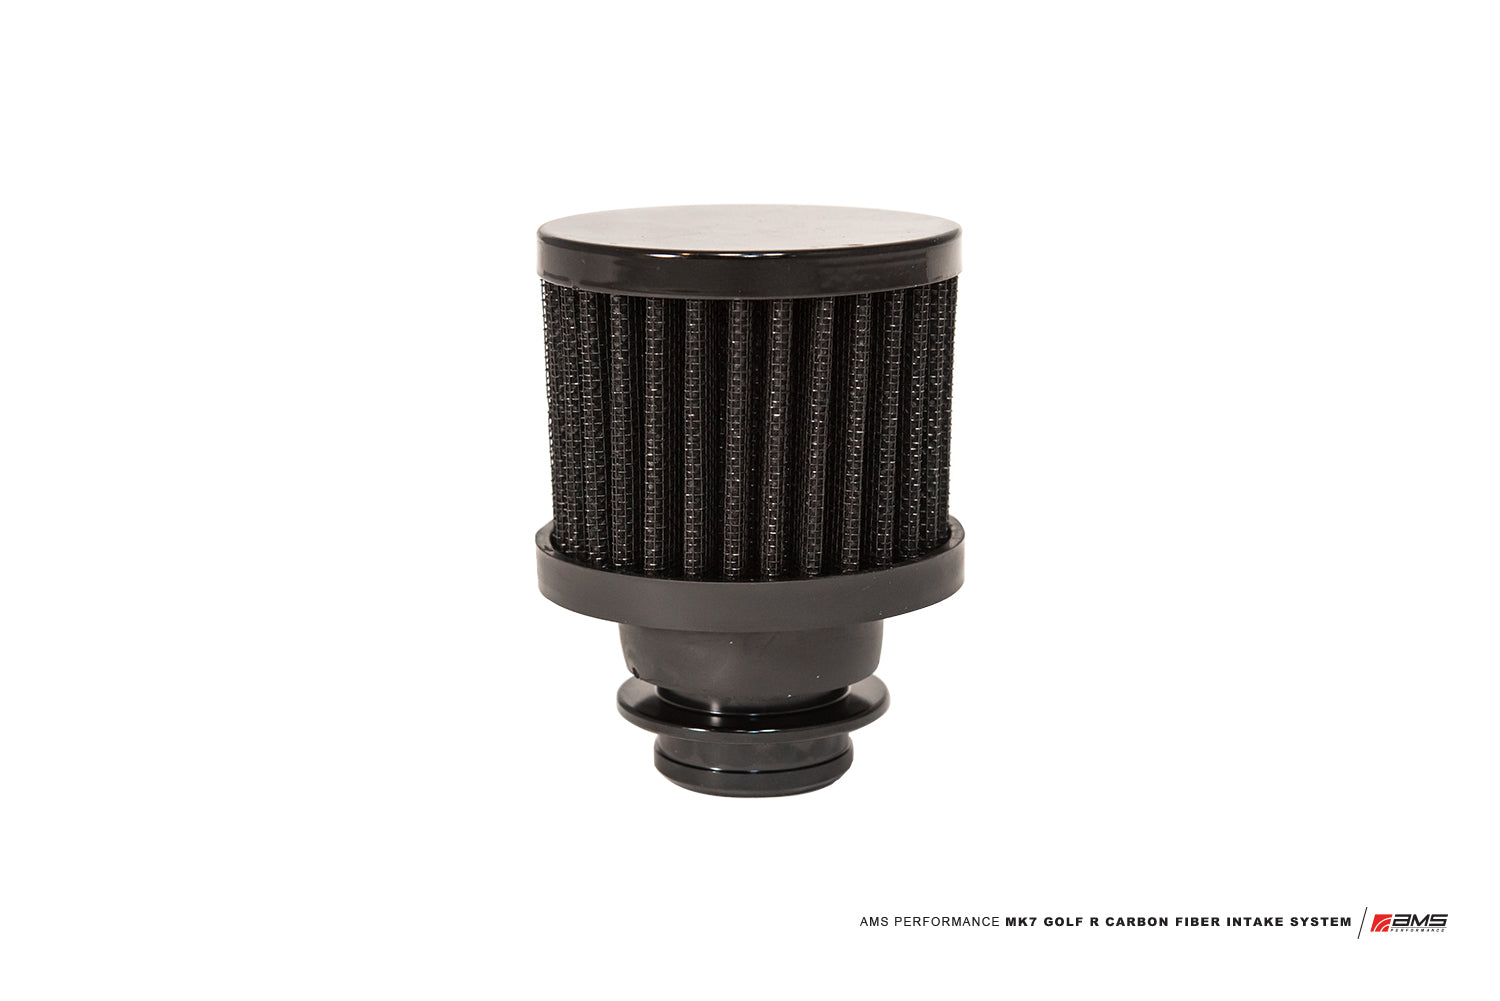 AMS AMS.21.08.0002-1 Secondary air injection dry media filter kit VW Golf R MK7 Photo-1 